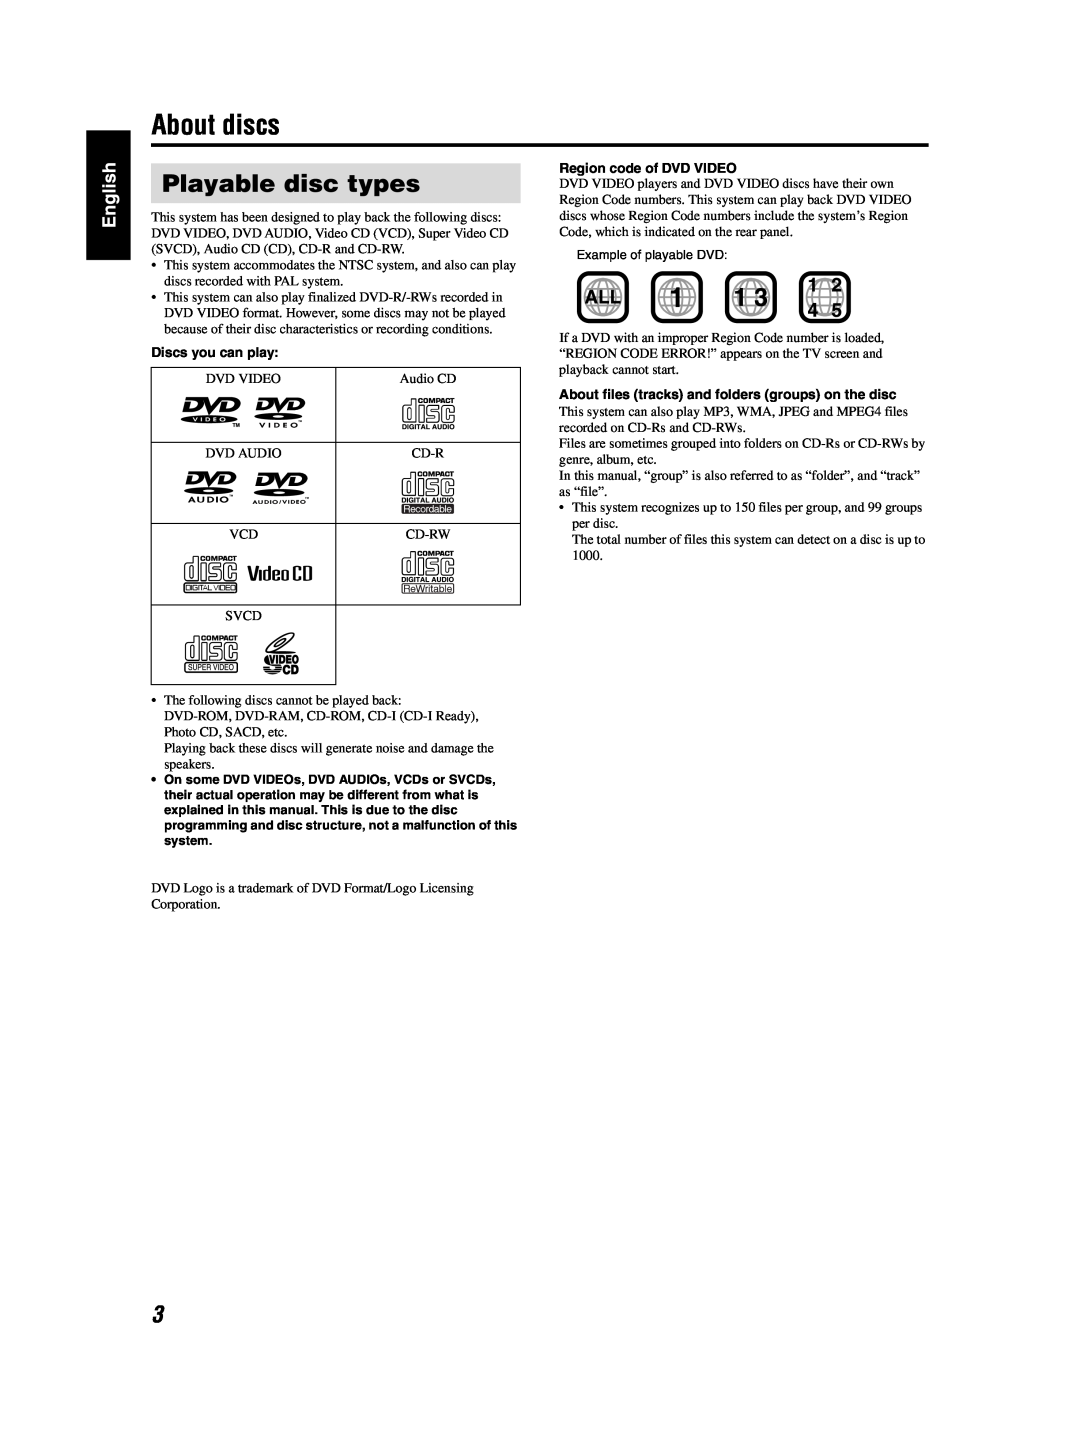 JVC TH-S2, TH-S3 manual About discs, Playable disc types, Discs you can play, Region code of DVD VIDEO 